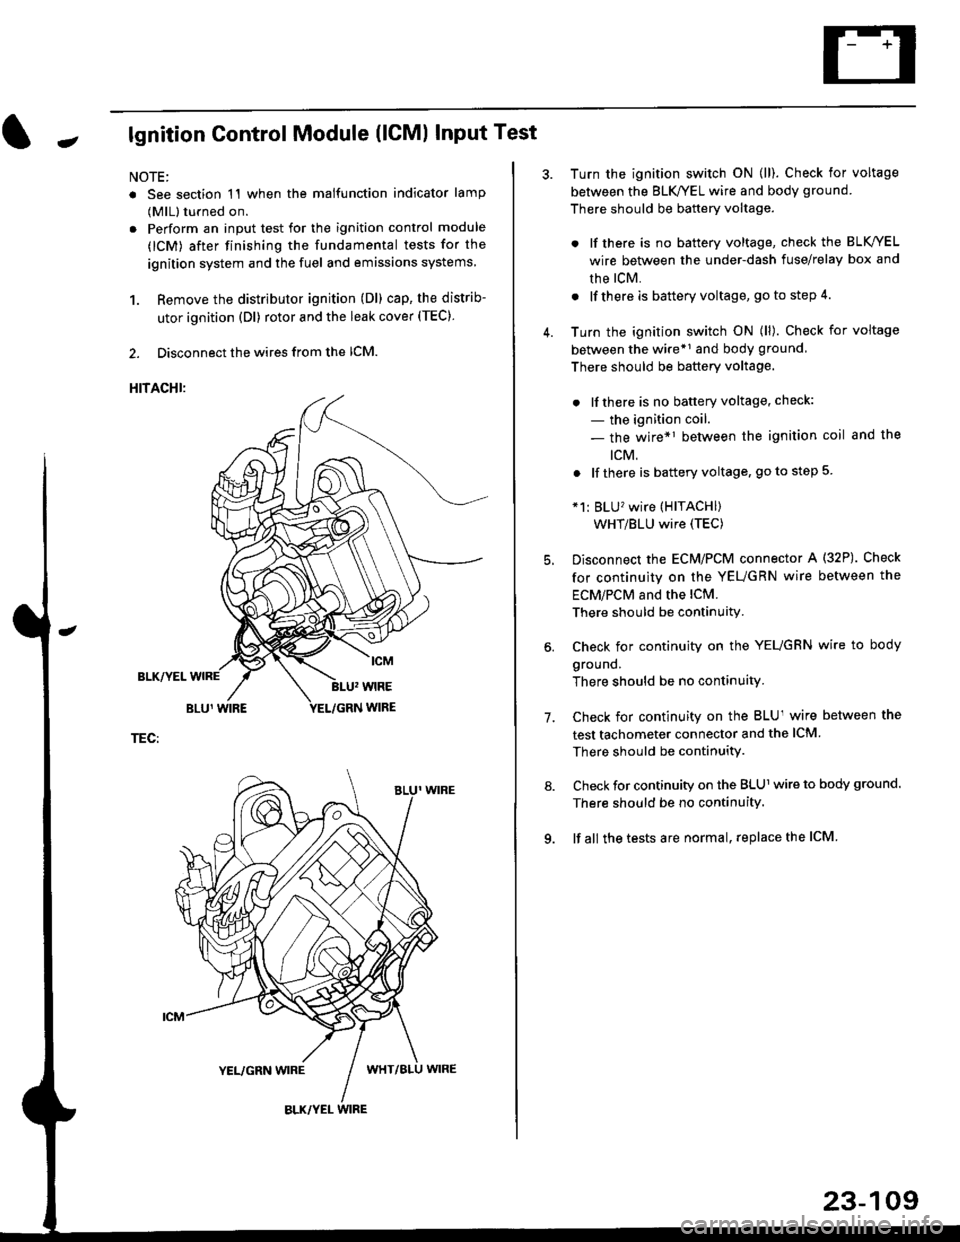 HONDA CIVIC 1996 6.G Workshop Manual Jlgnition Control Module (lCMl Input Test
NOTE:
. See section 1l when the malfunction indicator lamp
(MlL) turned on.
. Perform an input test for the ignition control module
(lCM) after finishing the